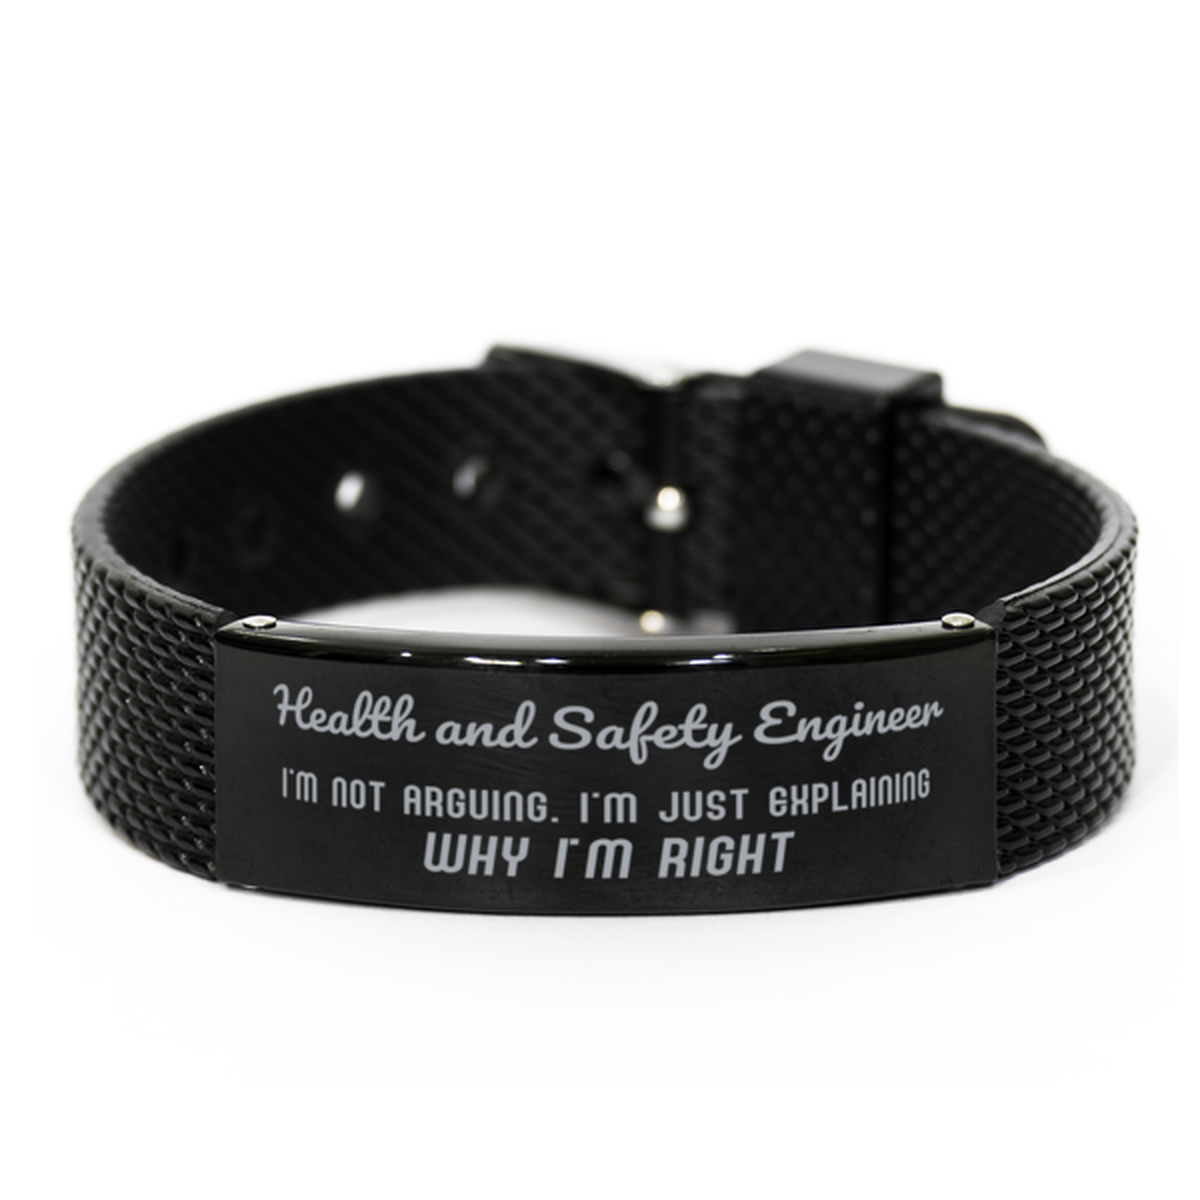 Health and Safety Engineer I'm not Arguing. I'm Just Explaining Why I'm RIGHT Black Shark Mesh Bracelet, Funny Saying Quote Health and Safety Engineer Gifts For Health and Safety Engineer Graduation Birthday Christmas Gifts for Men Women Coworker